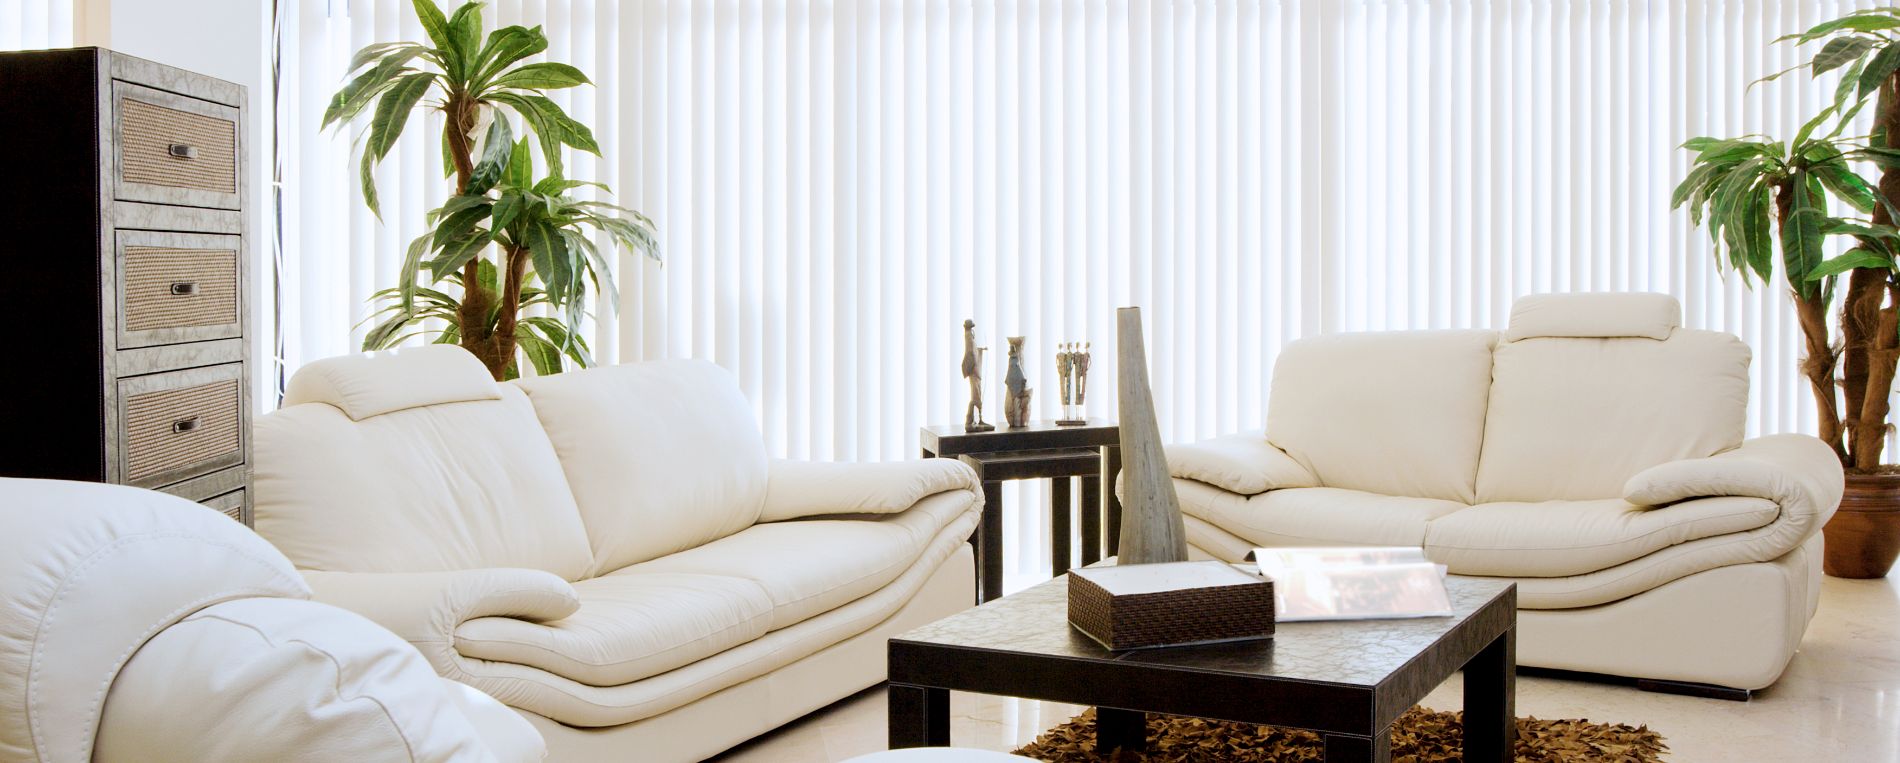 View at a bright living room with vertical window blinds